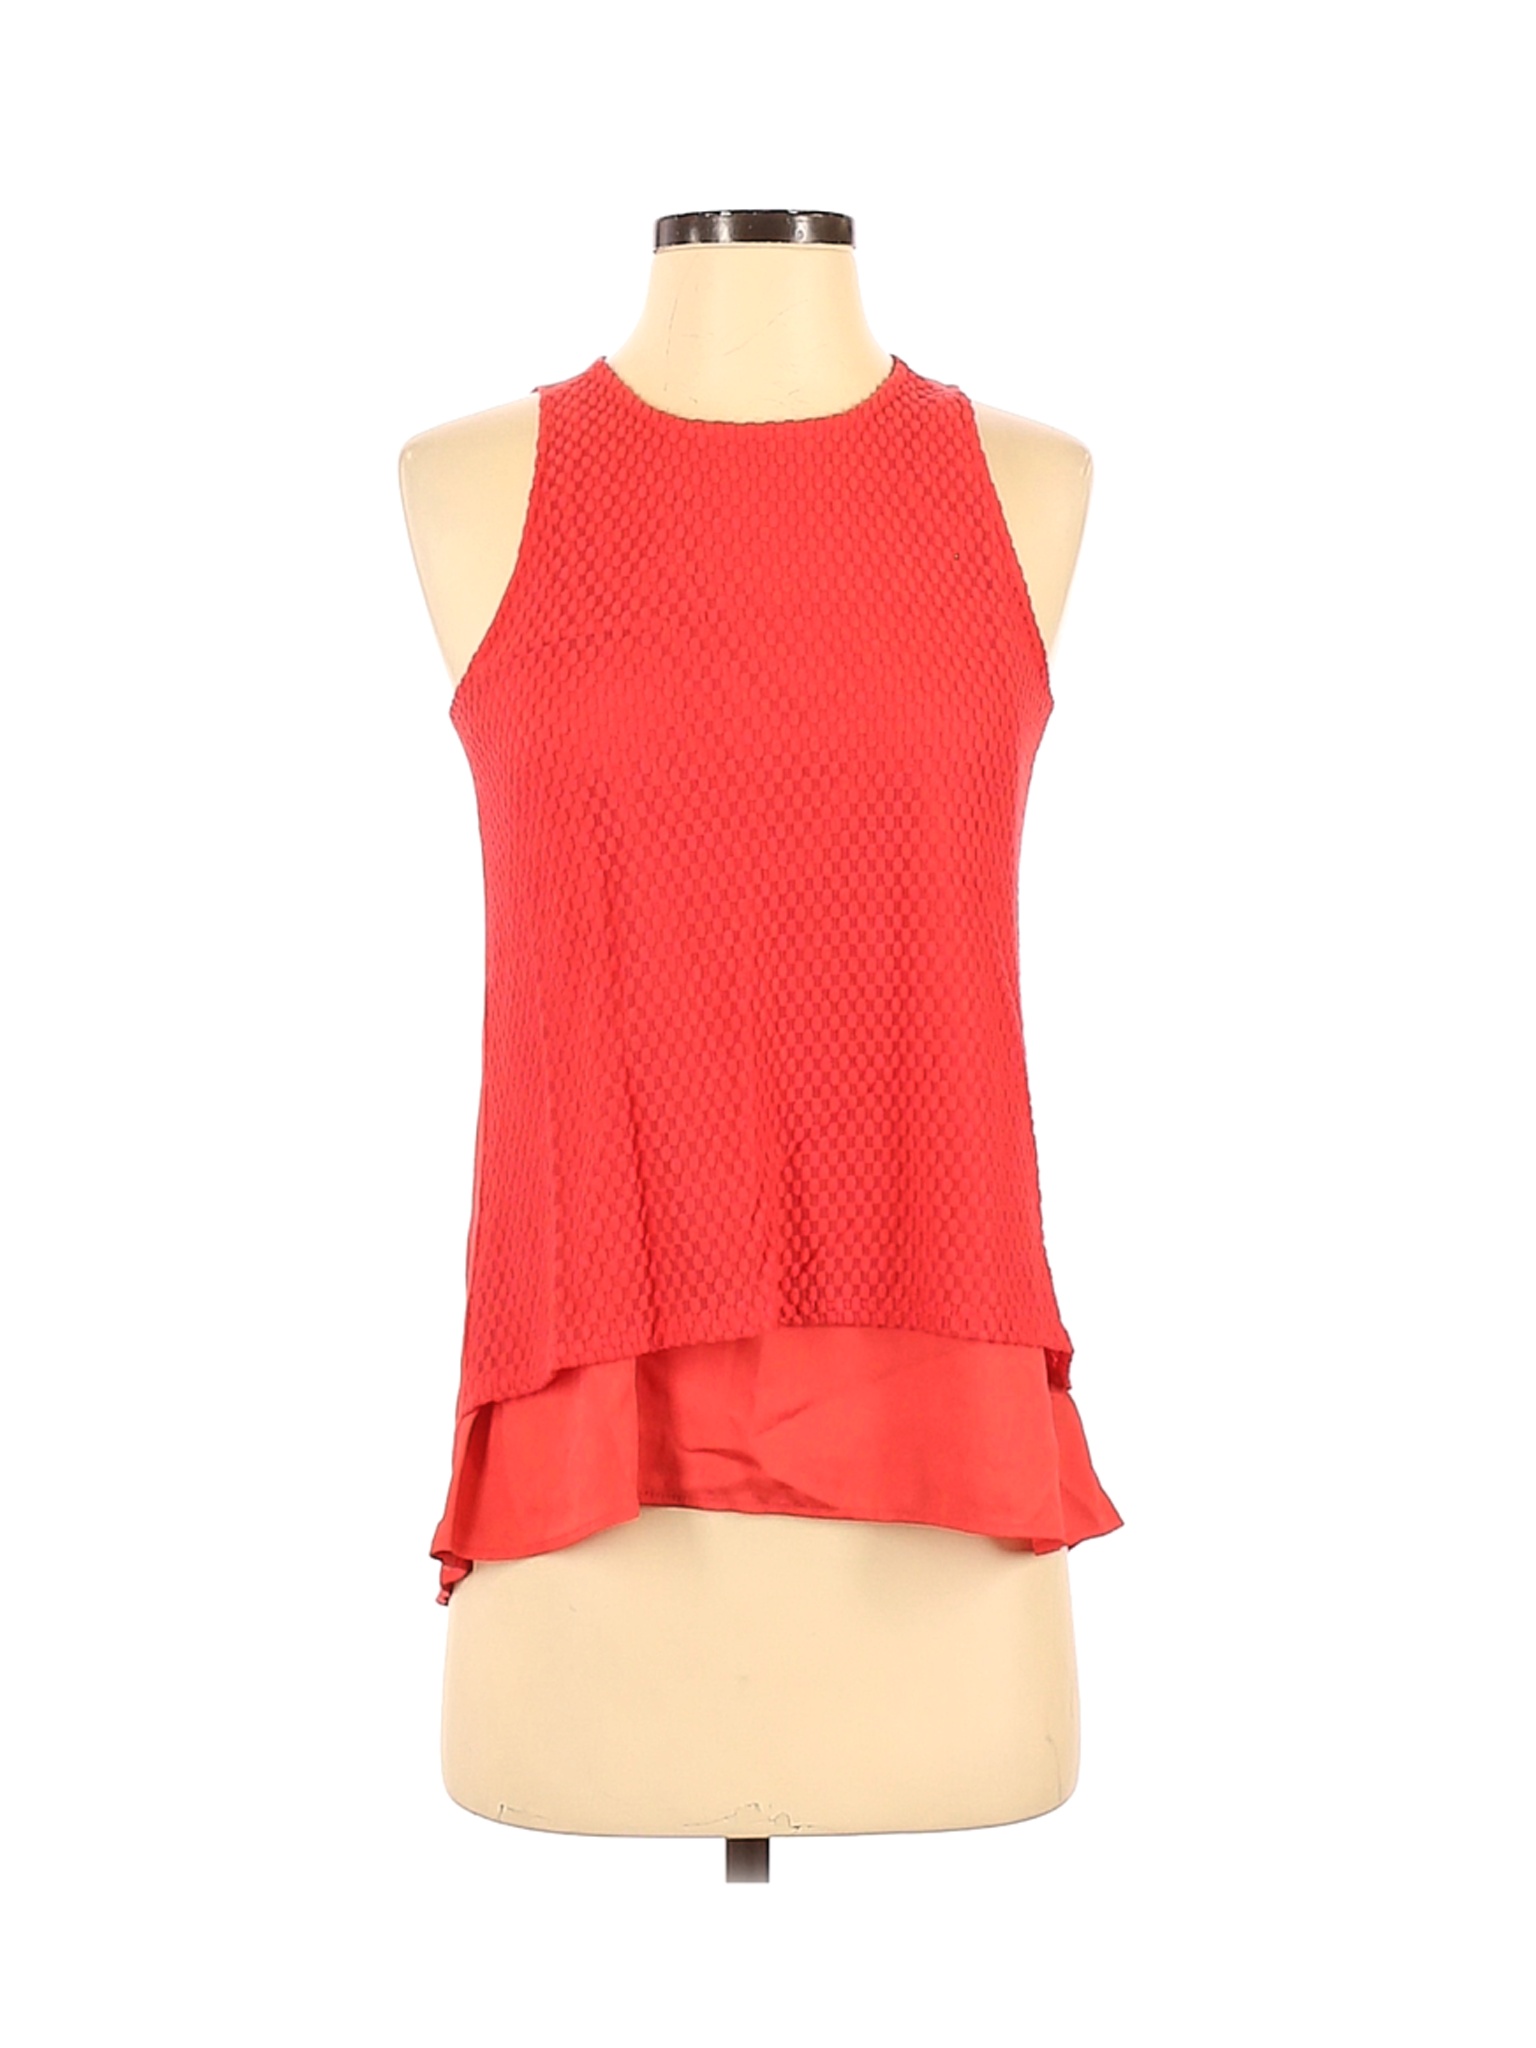 The Limited Women Pink Sleeveless Top S | eBay